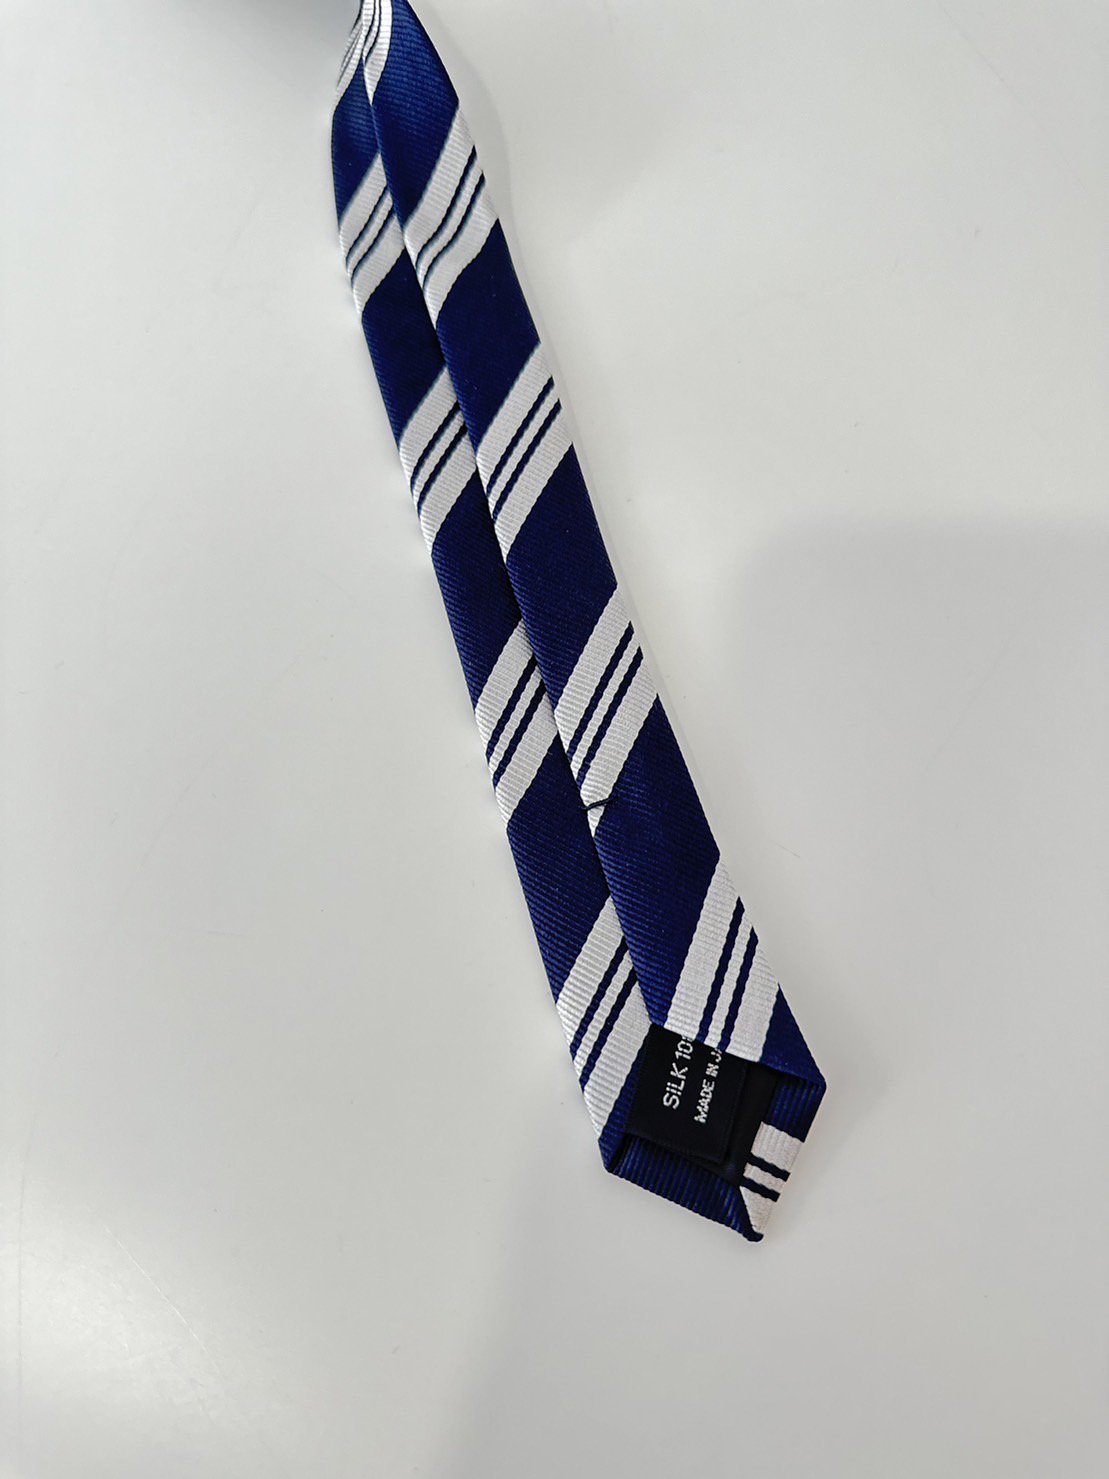 LITTLEBIG<br />Resimental Tie 1 / Navy<img class='new_mark_img2' src='https://img.shop-pro.jp/img/new/icons14.gif' style='border:none;display:inline;margin:0px;padding:0px;width:auto;' />